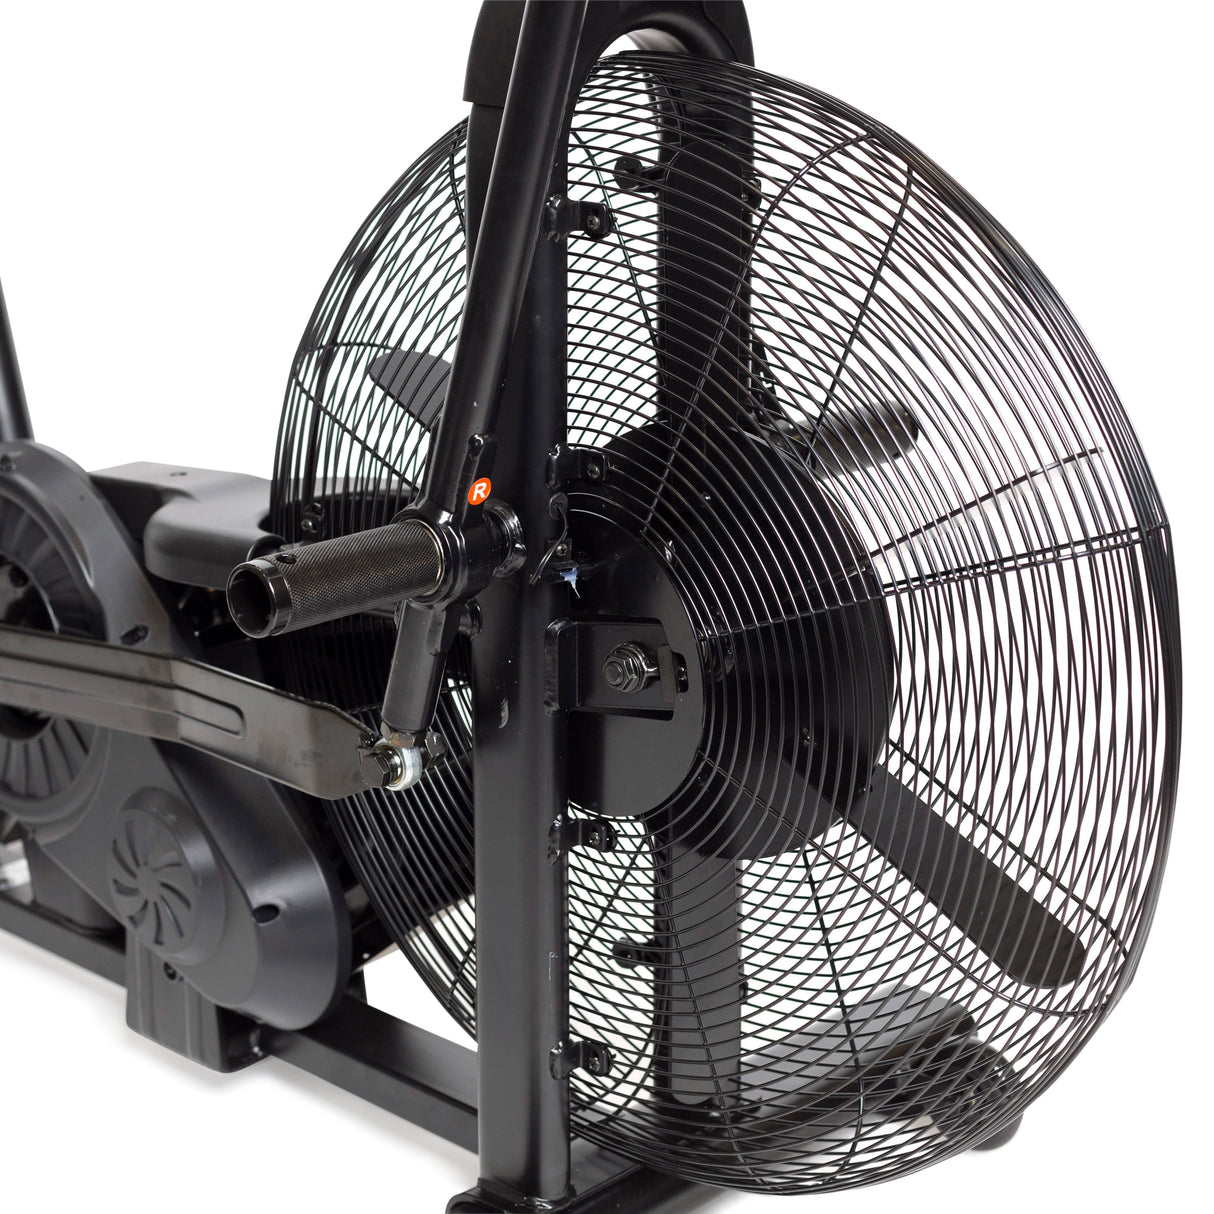 Residential Air Bike: Modern indoor cycle with built-in fan for cooling during intense workouts.